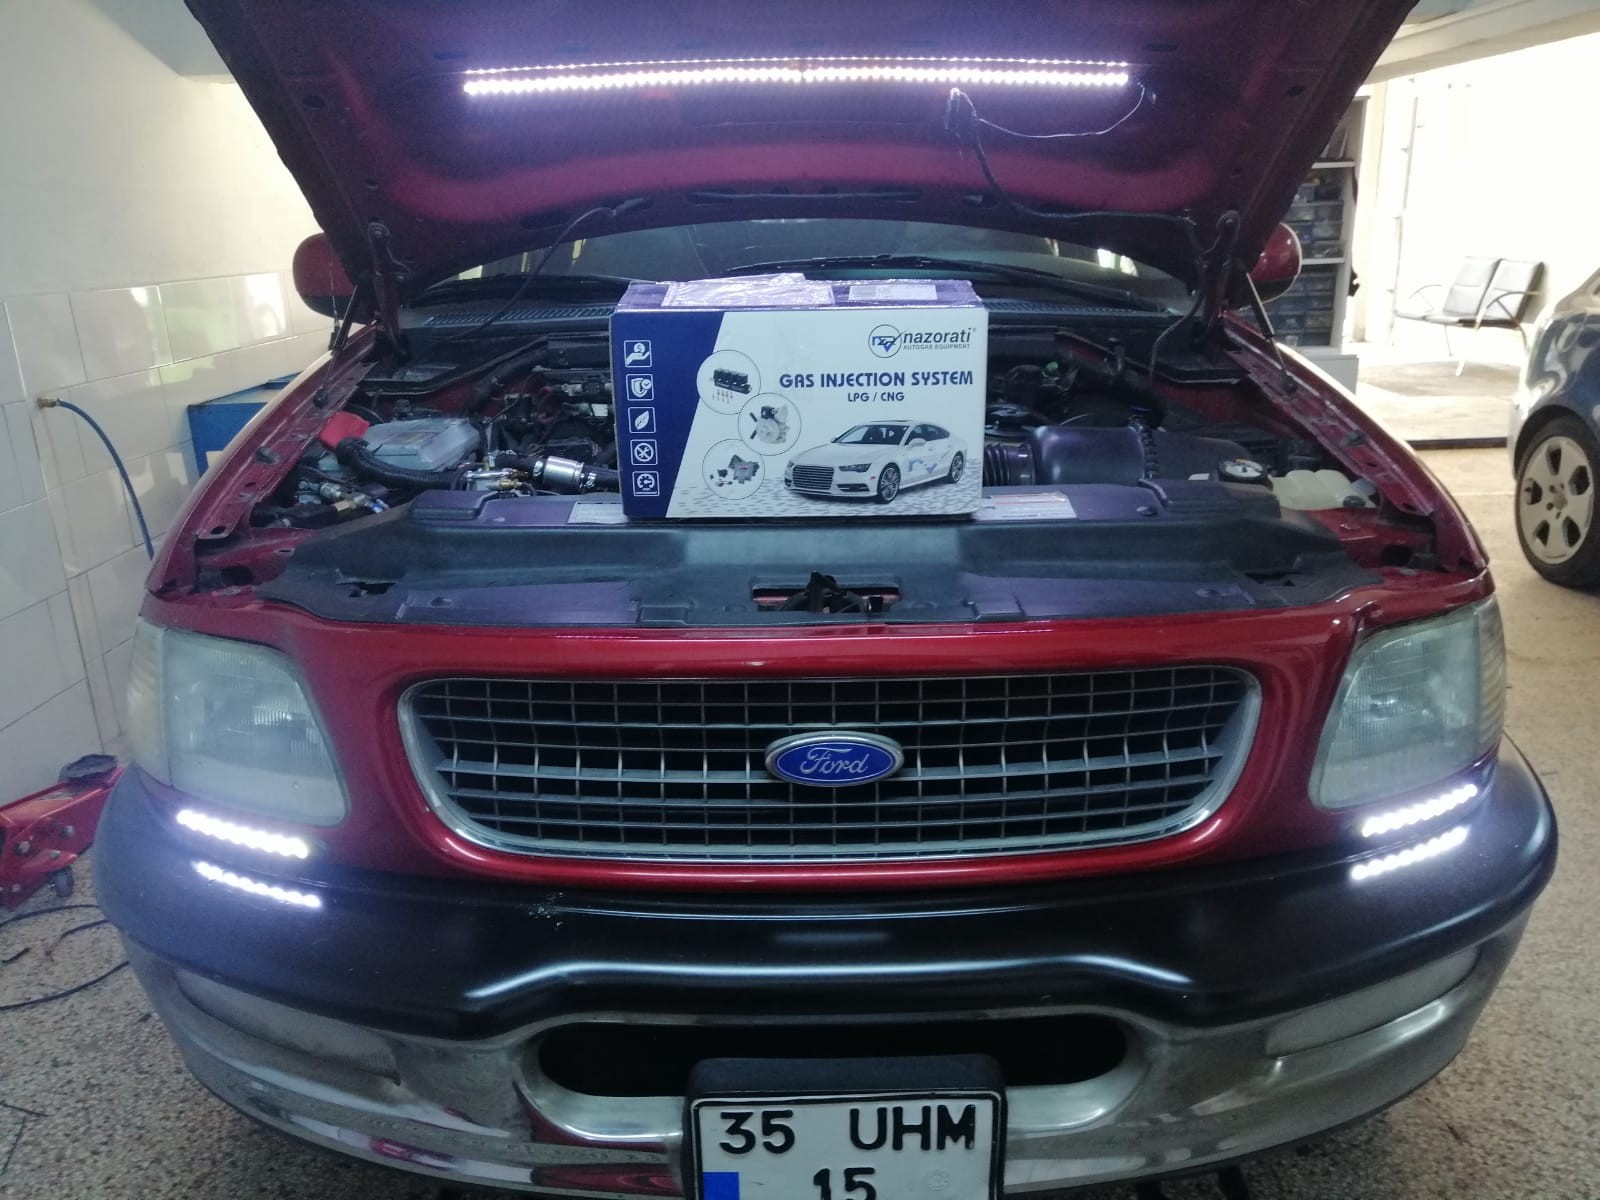 Ford Expedition 8Cyl 335hp - AEB 2568